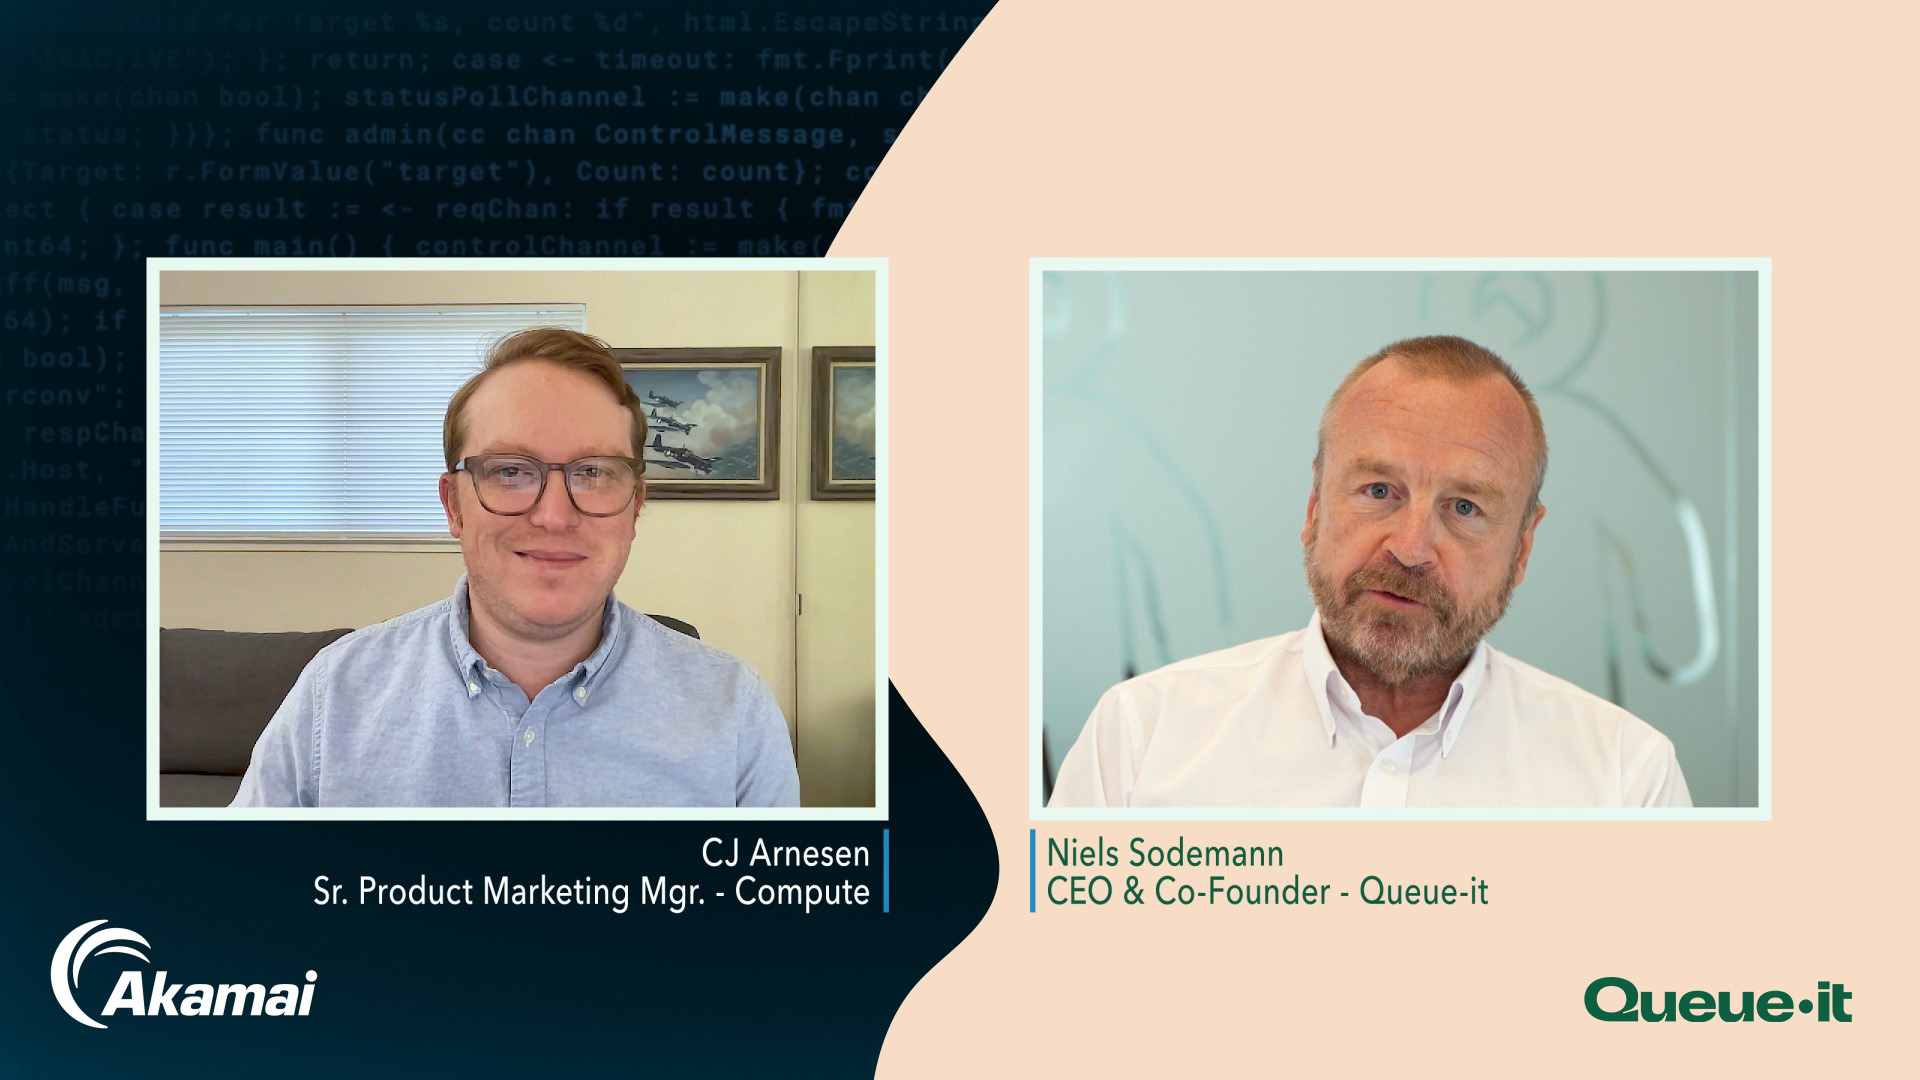 Queue-it CEO Niels Henrik Sodemann talks with Akamai about EdgeWorkers connector